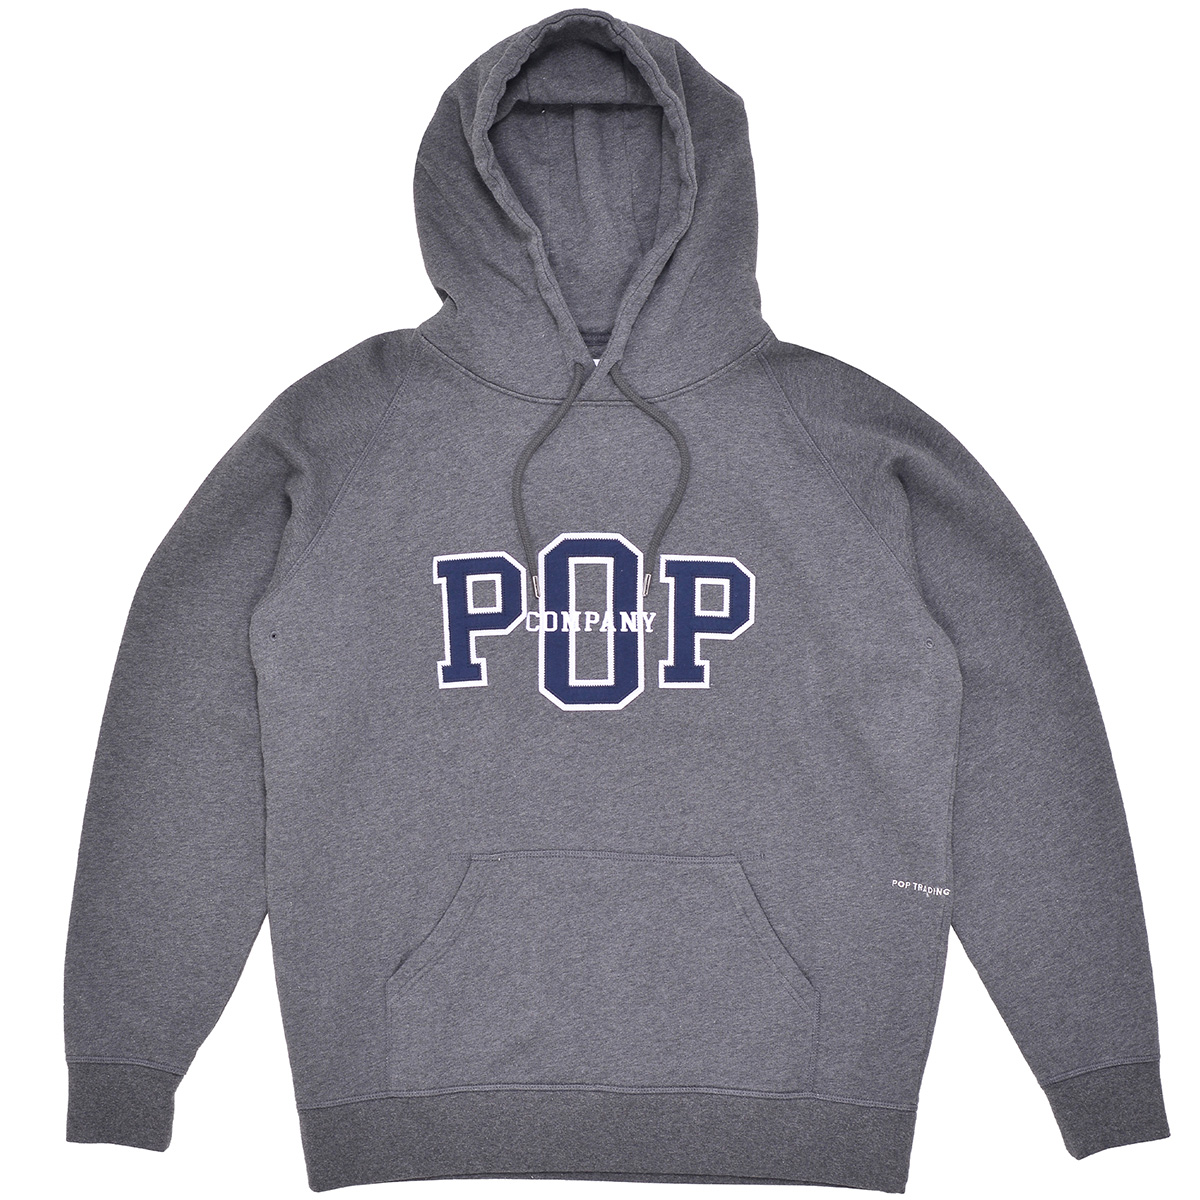 POP Company Hooded Sweater Charcoal Heather